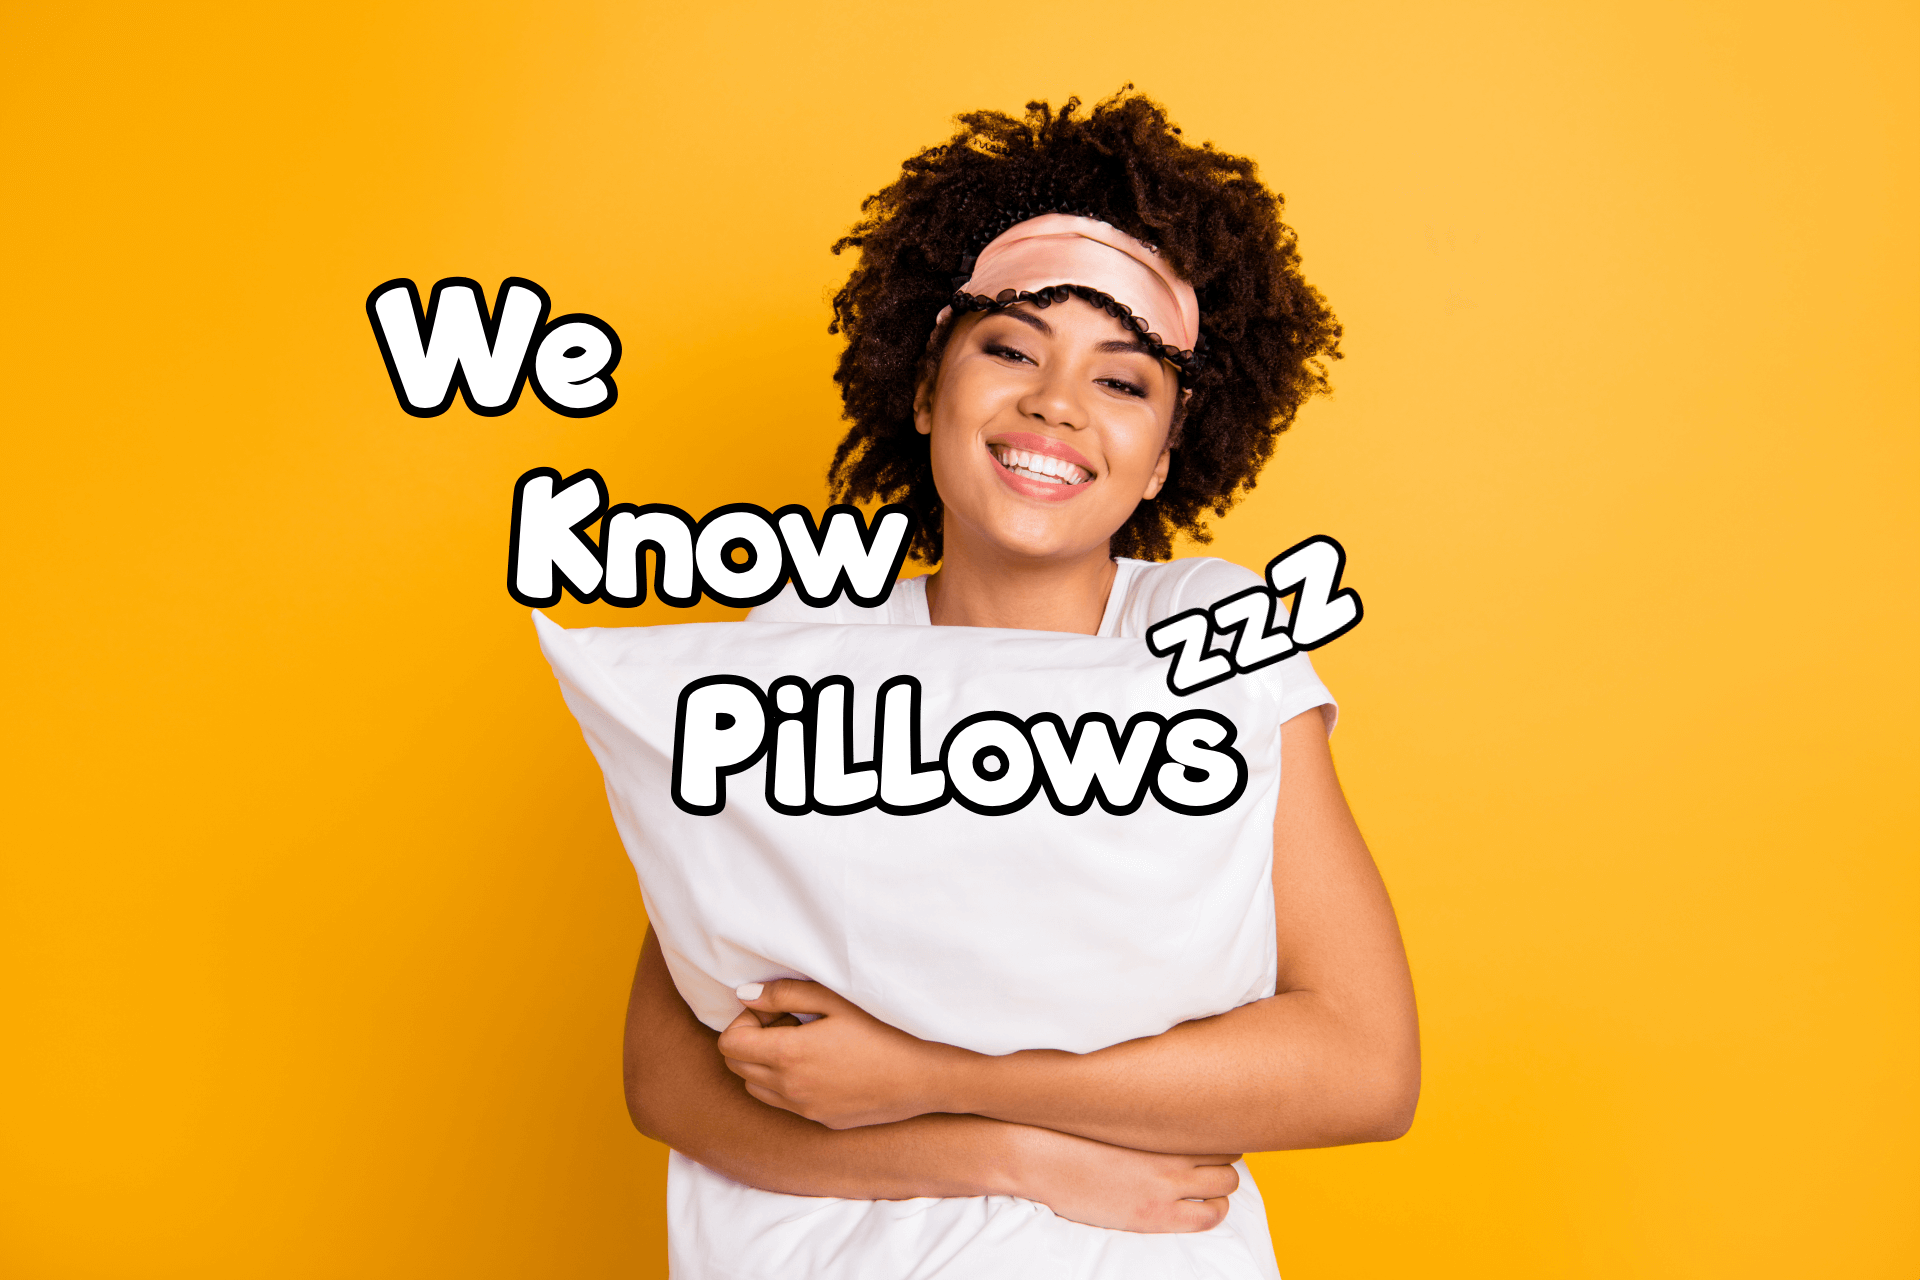 We Know Pillows